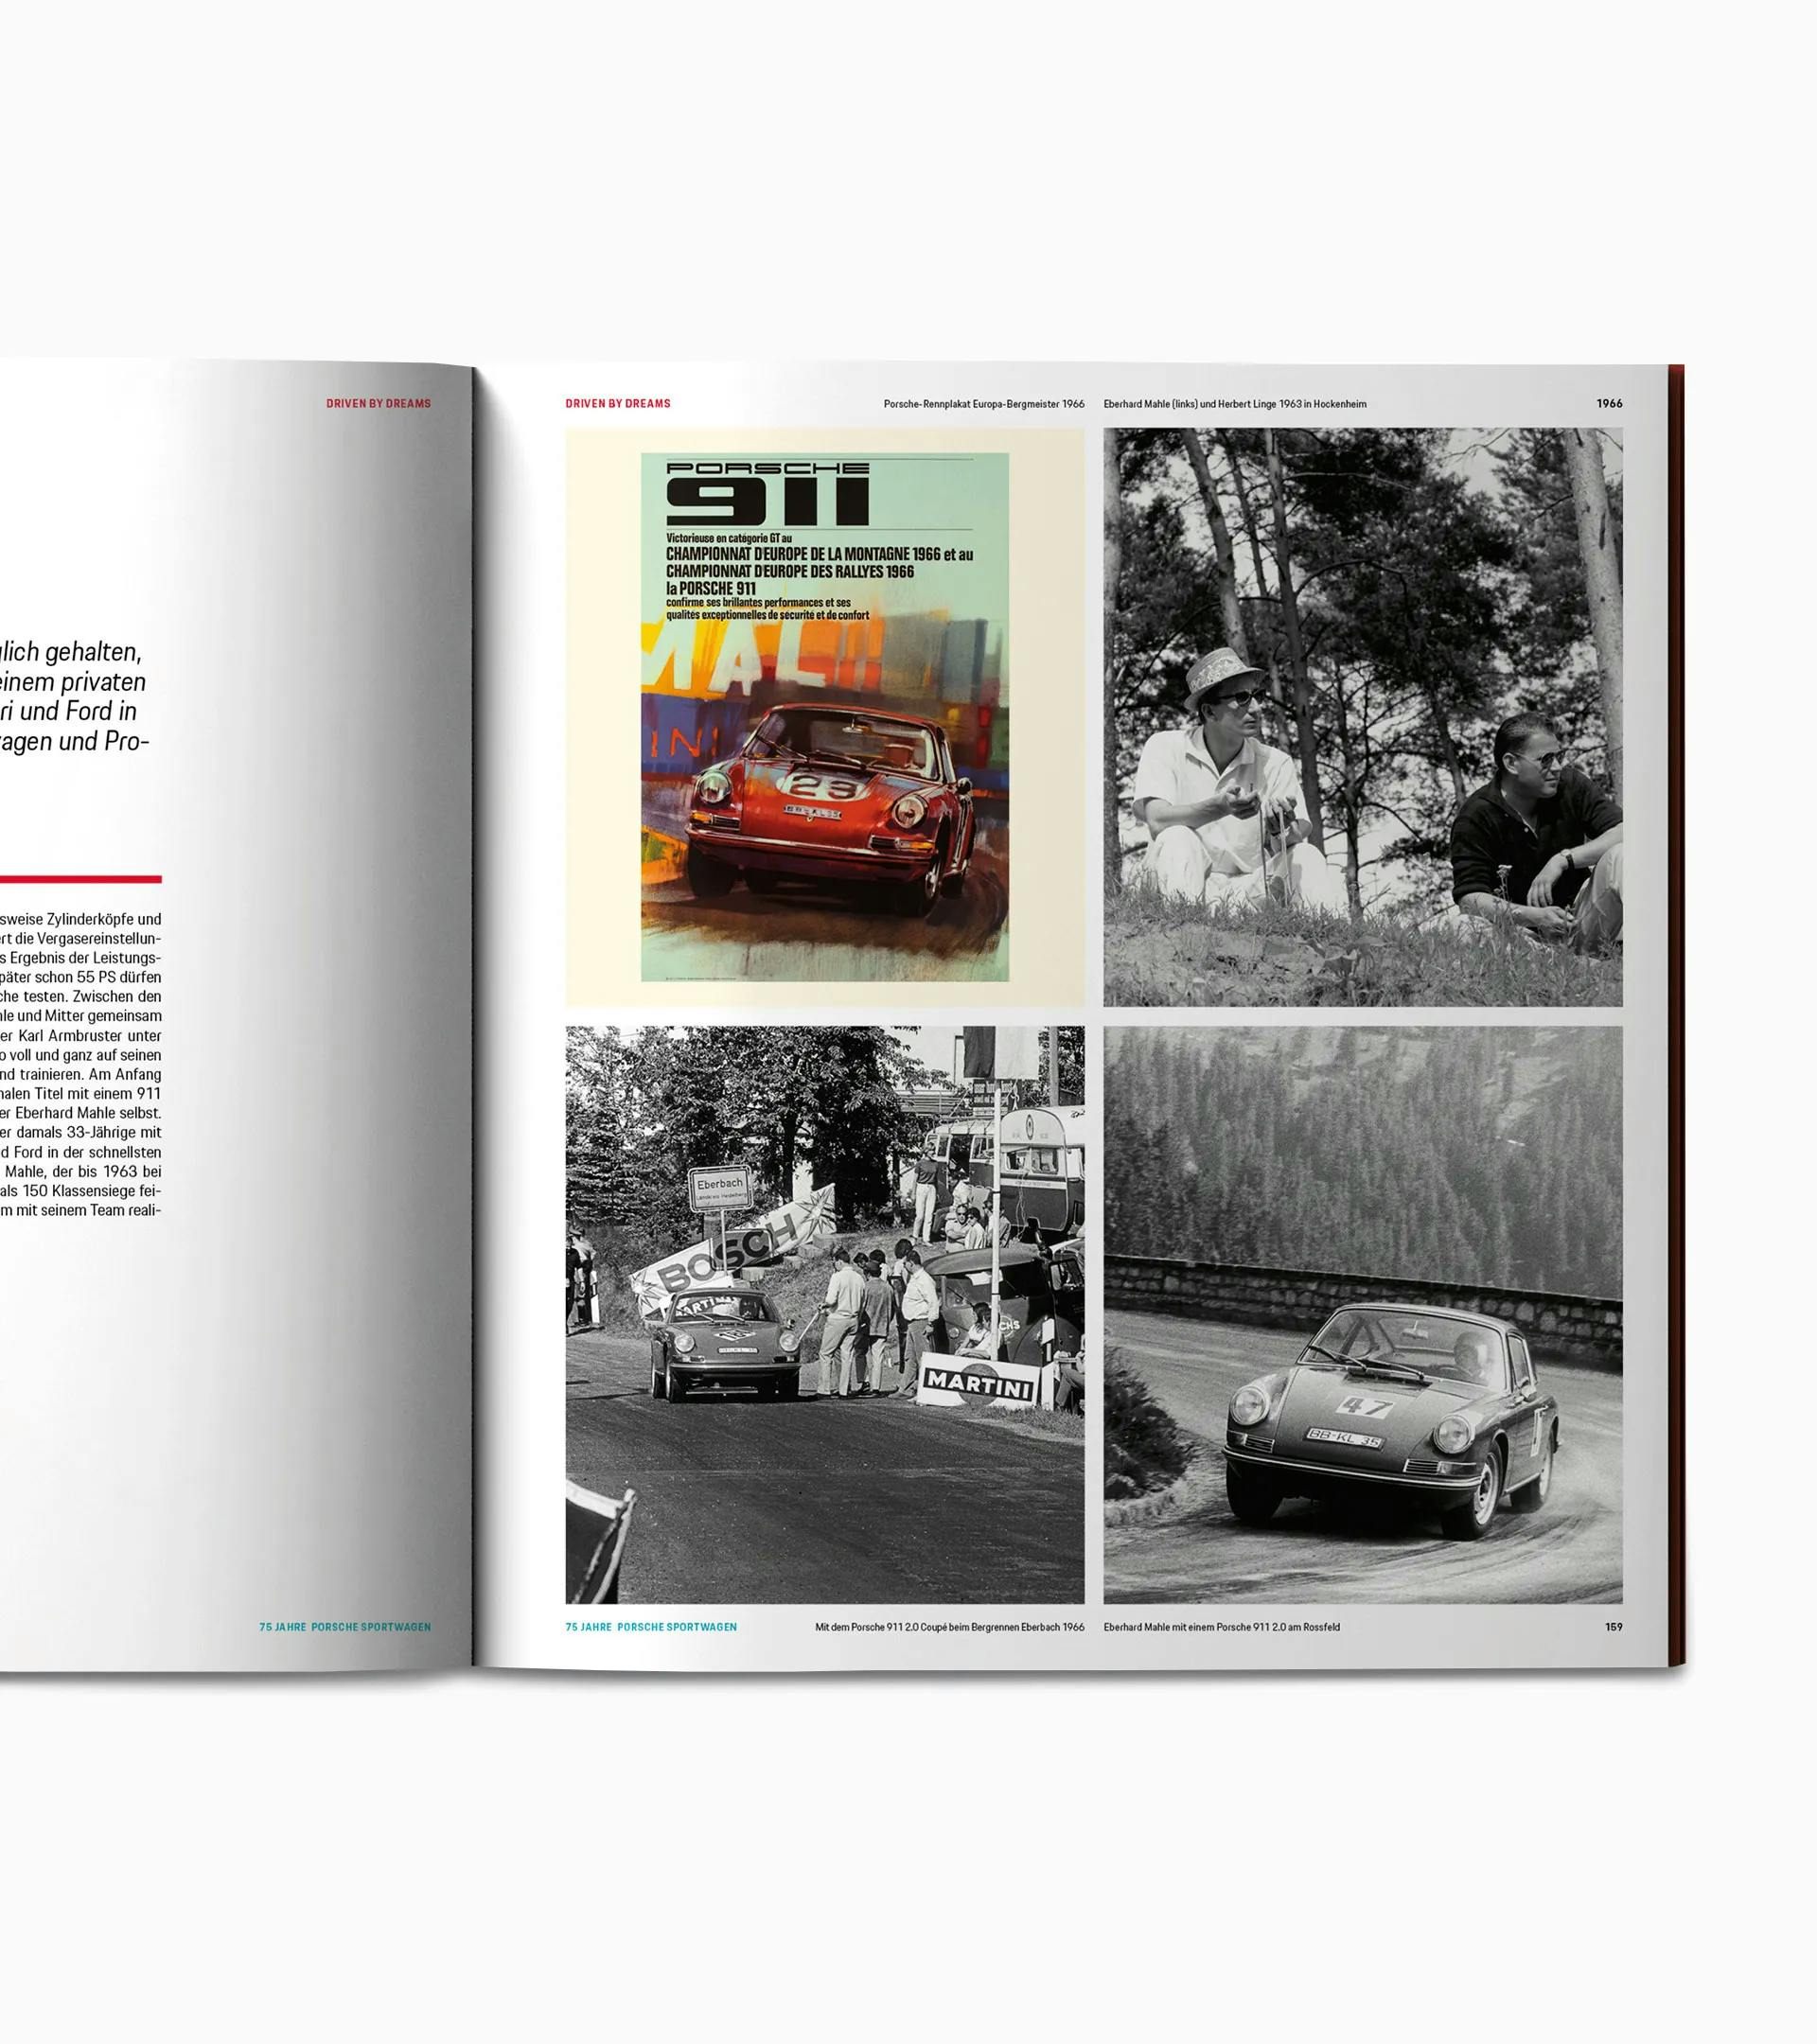 Book 'Driven by Dreams - 75 years of Porsche sports cars' book 5